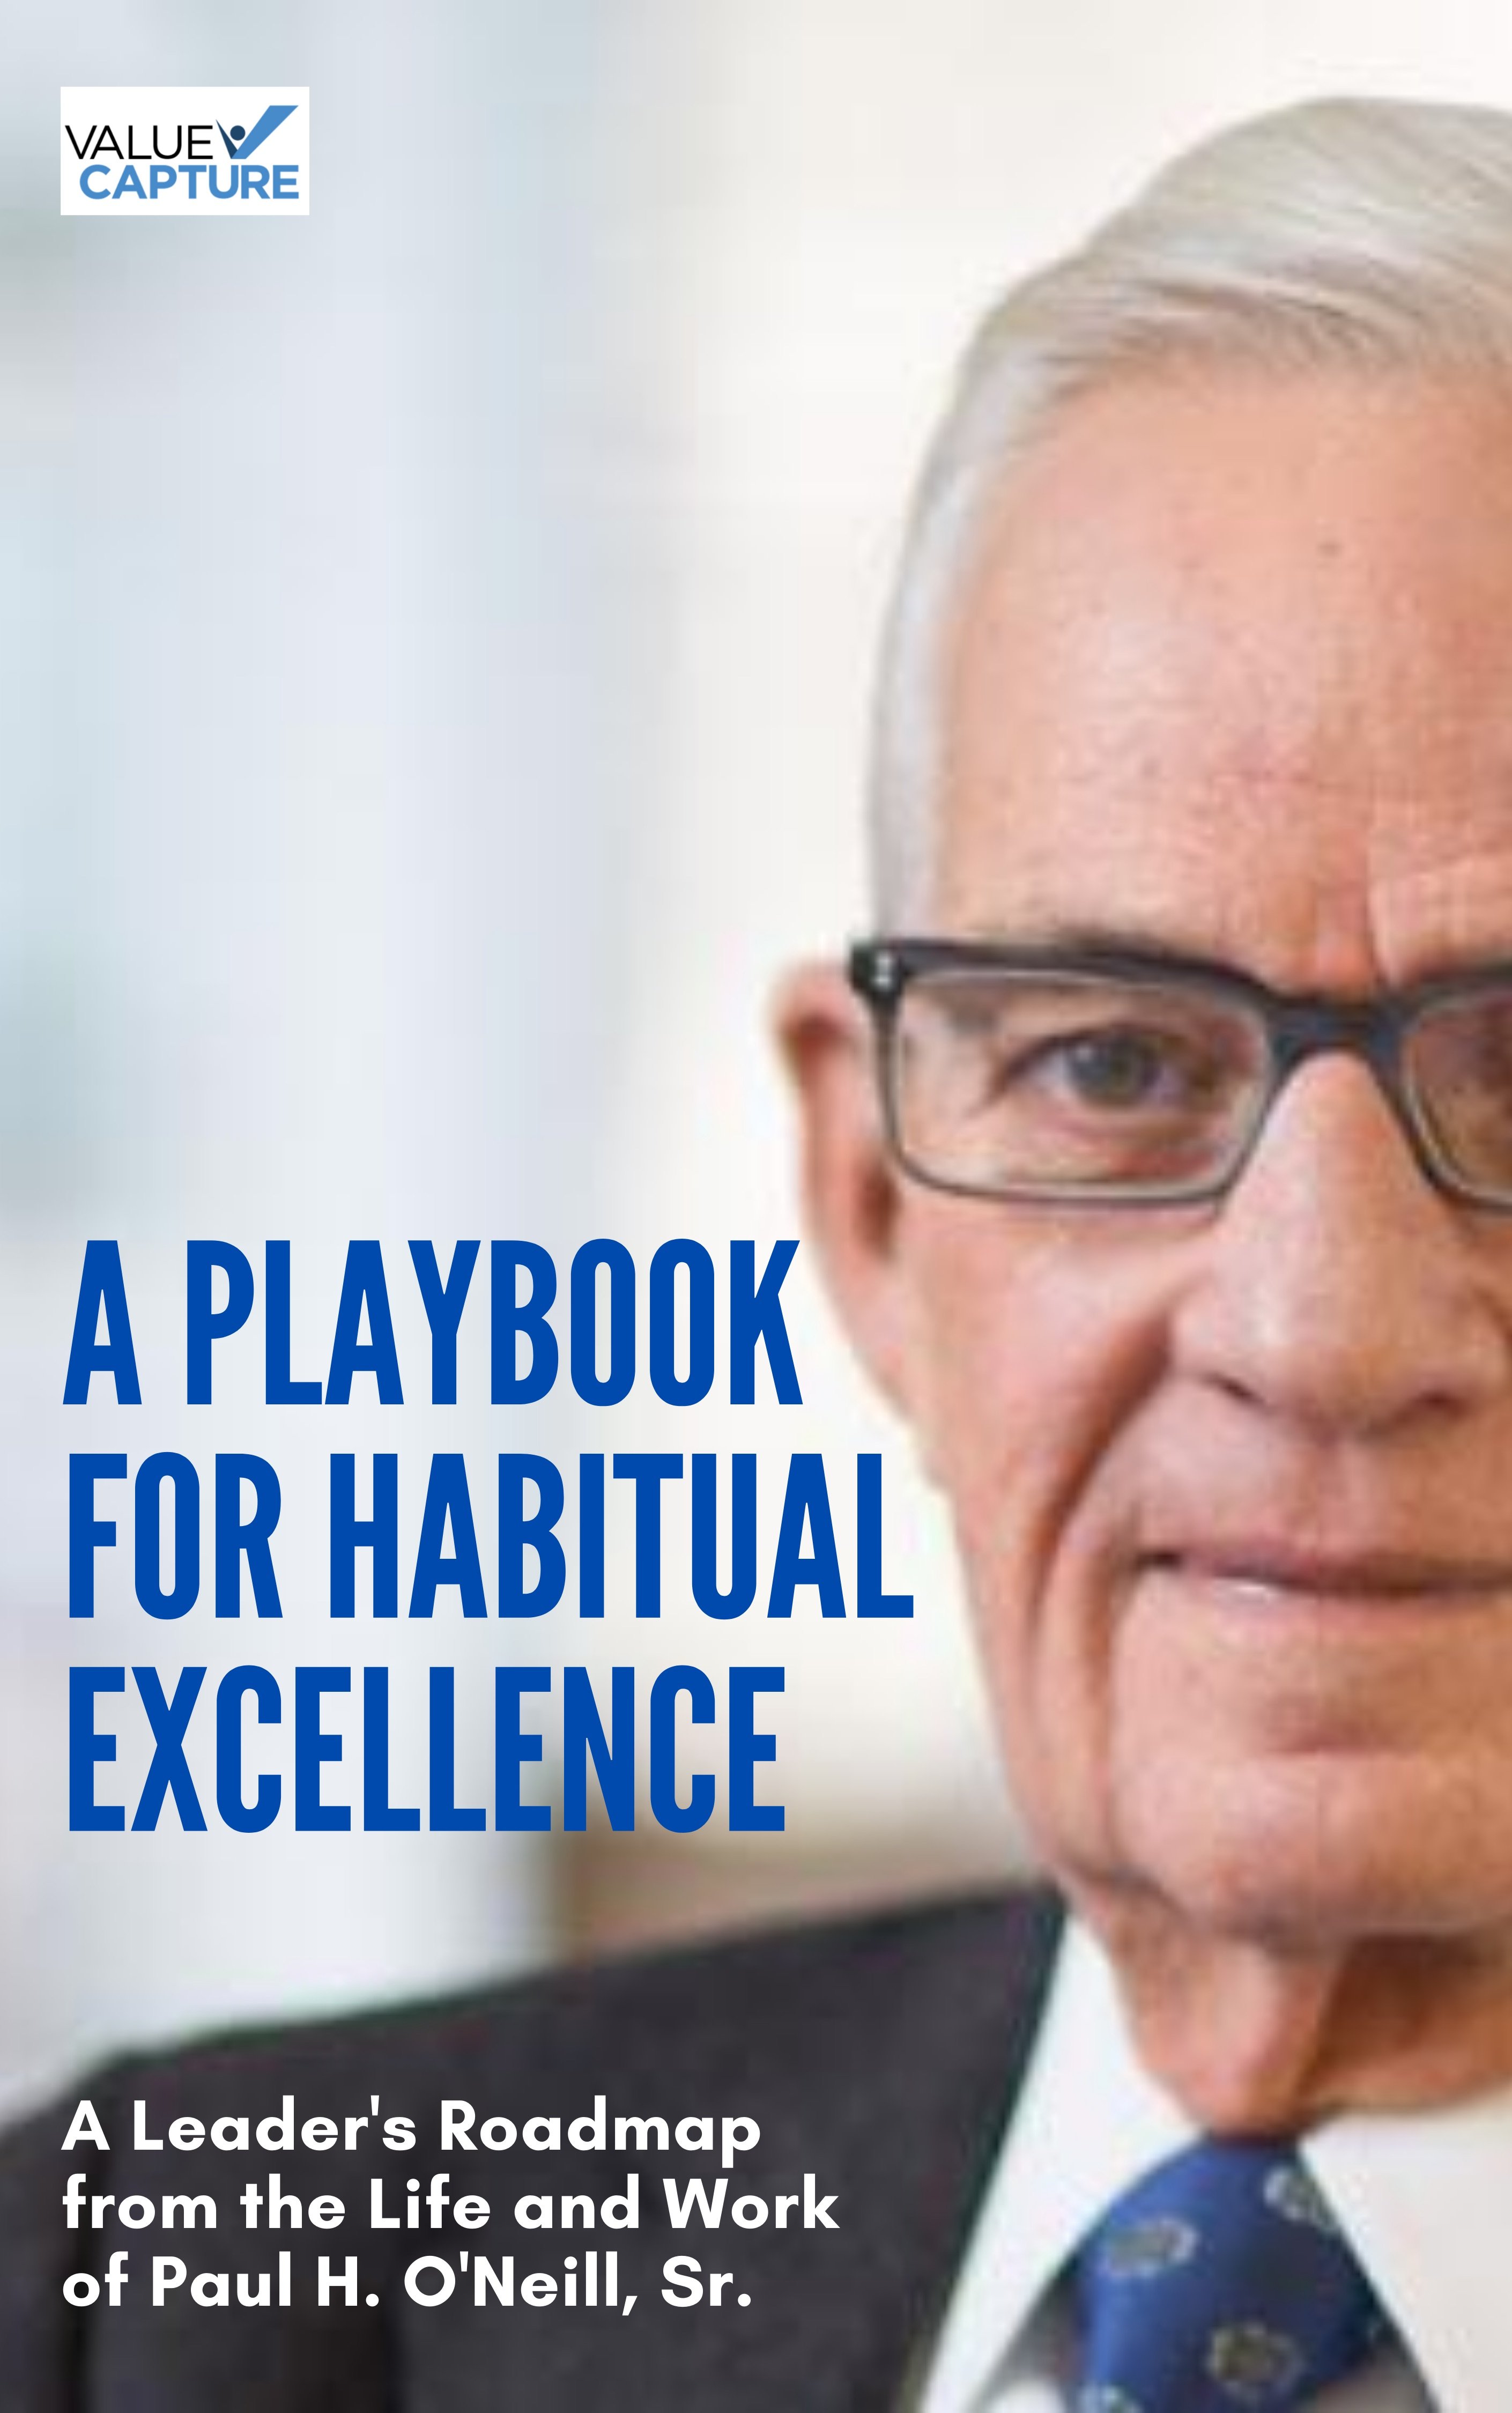  A Playbook for Habitual Excellence: A Leader's Roadmap